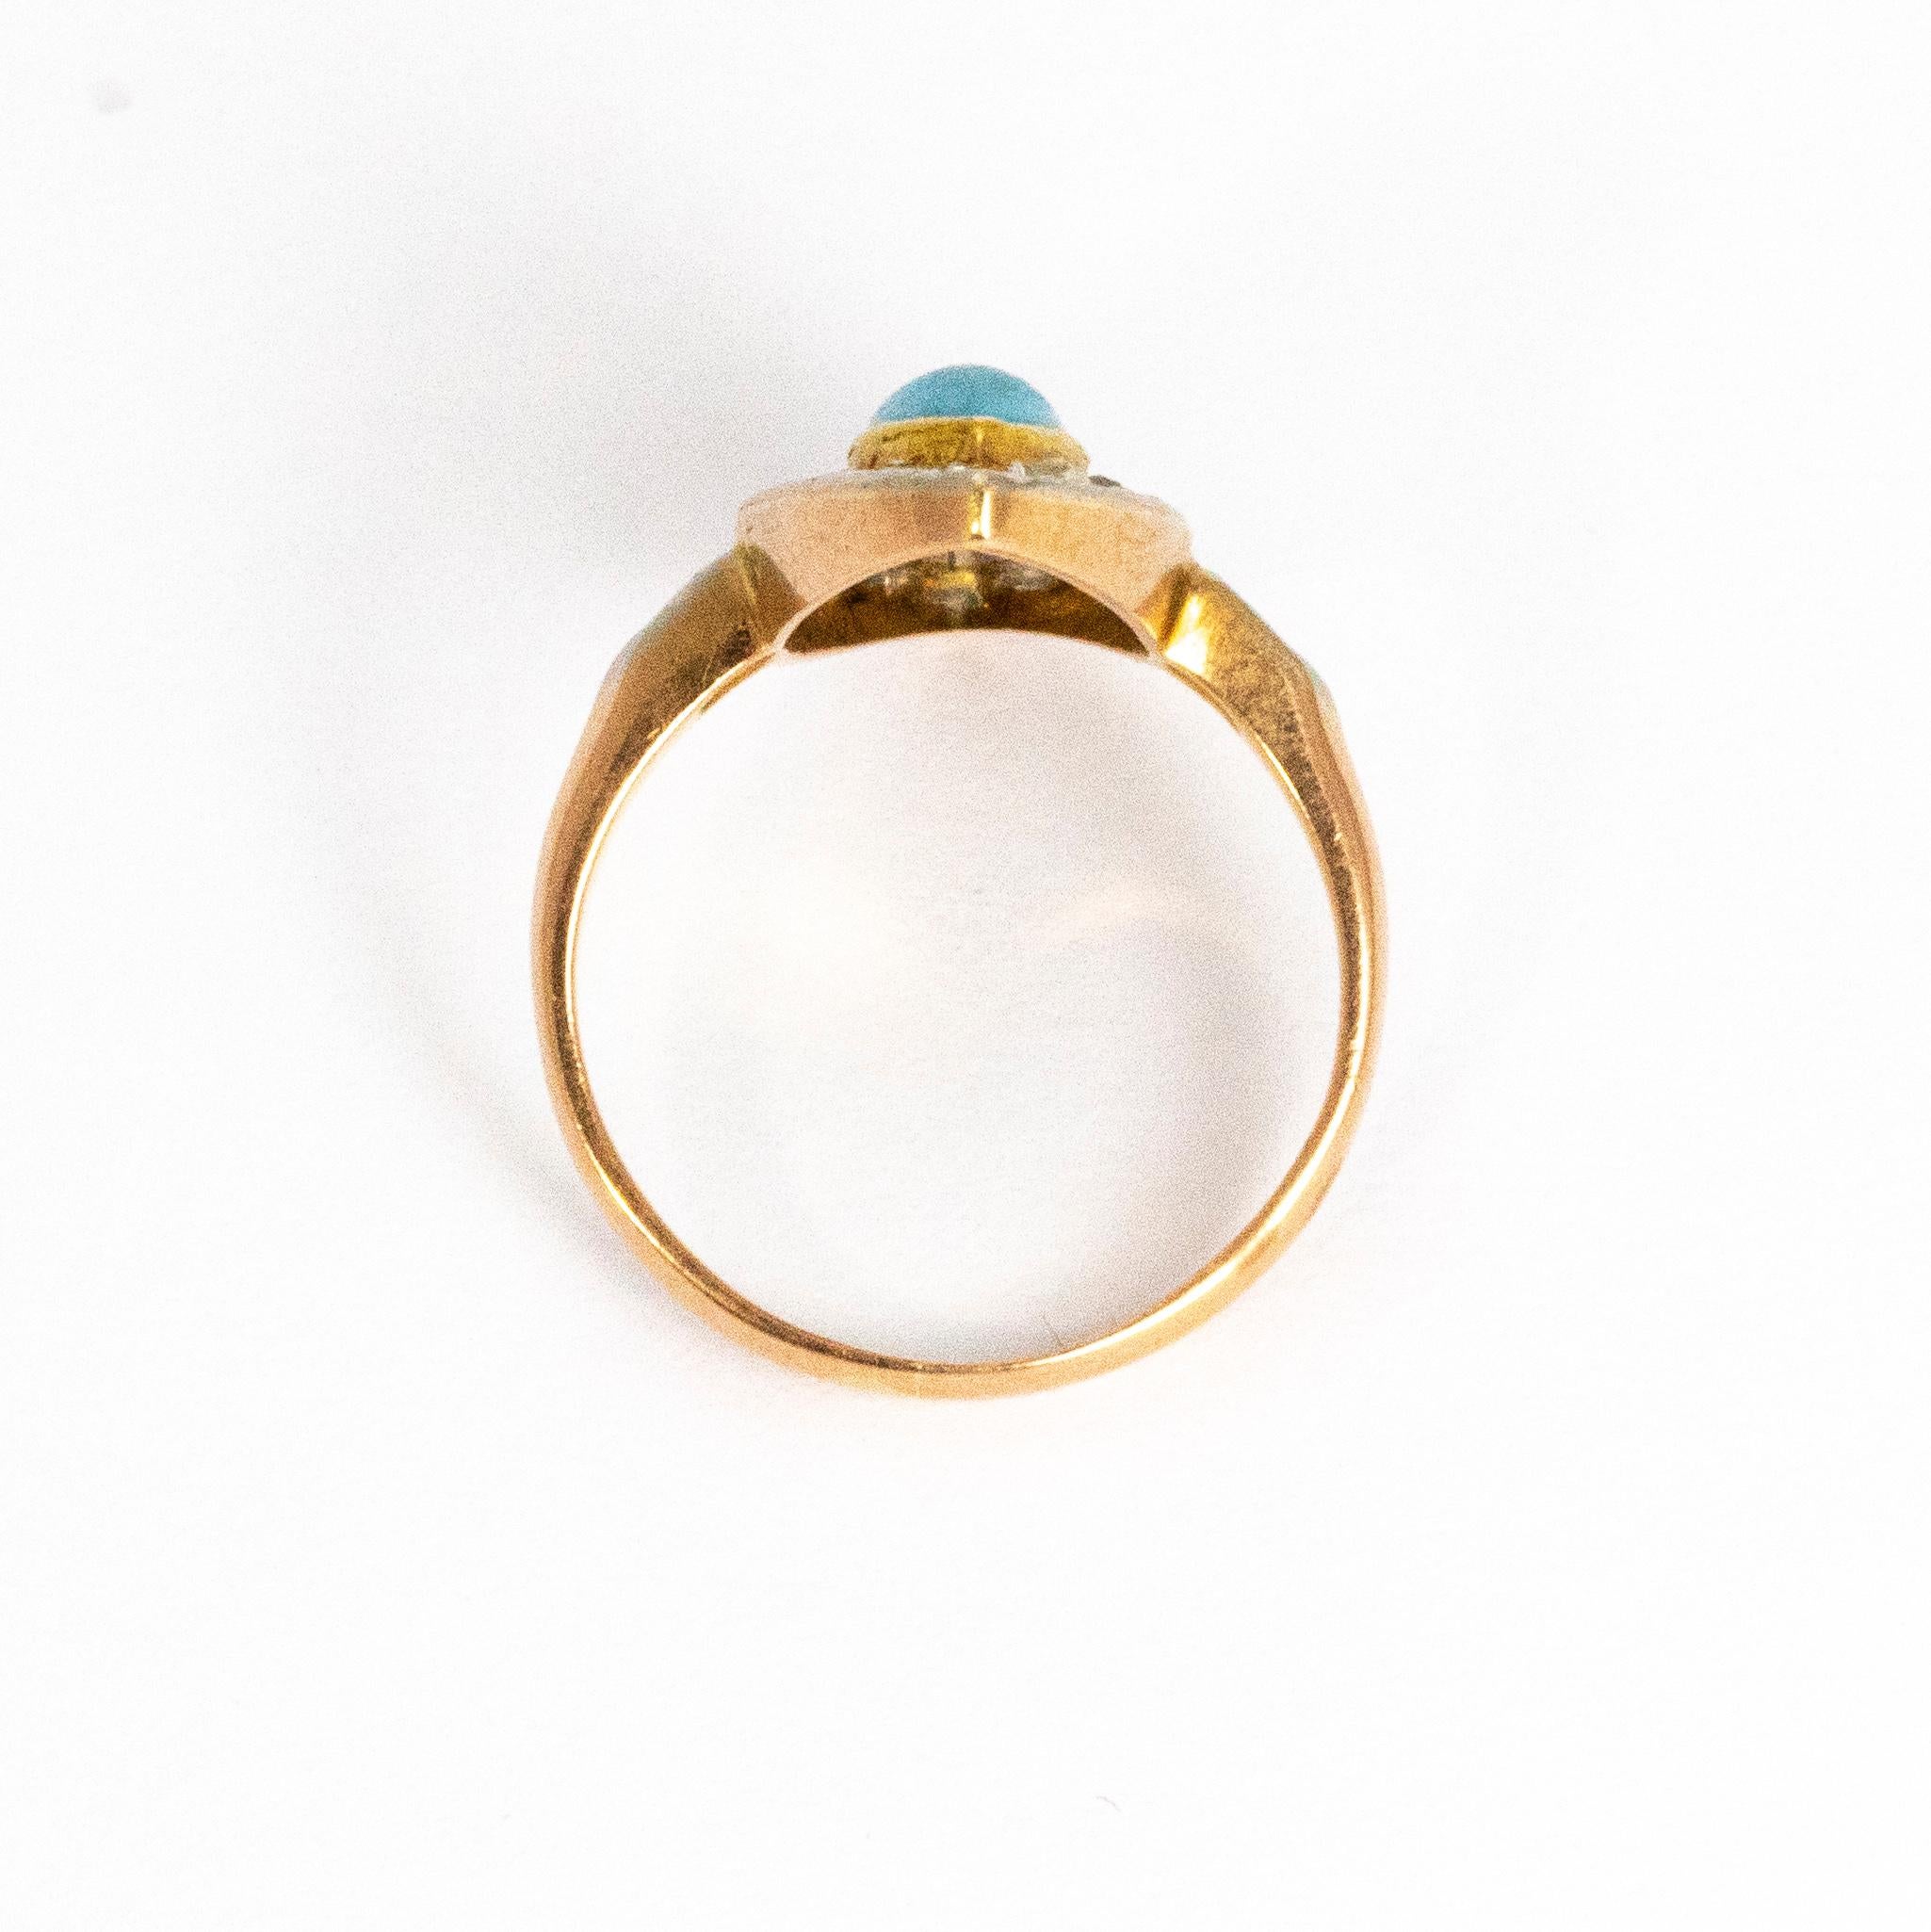 Antique Turquoise and Rose Cut Diamond 18 Carat Gold Ring 1